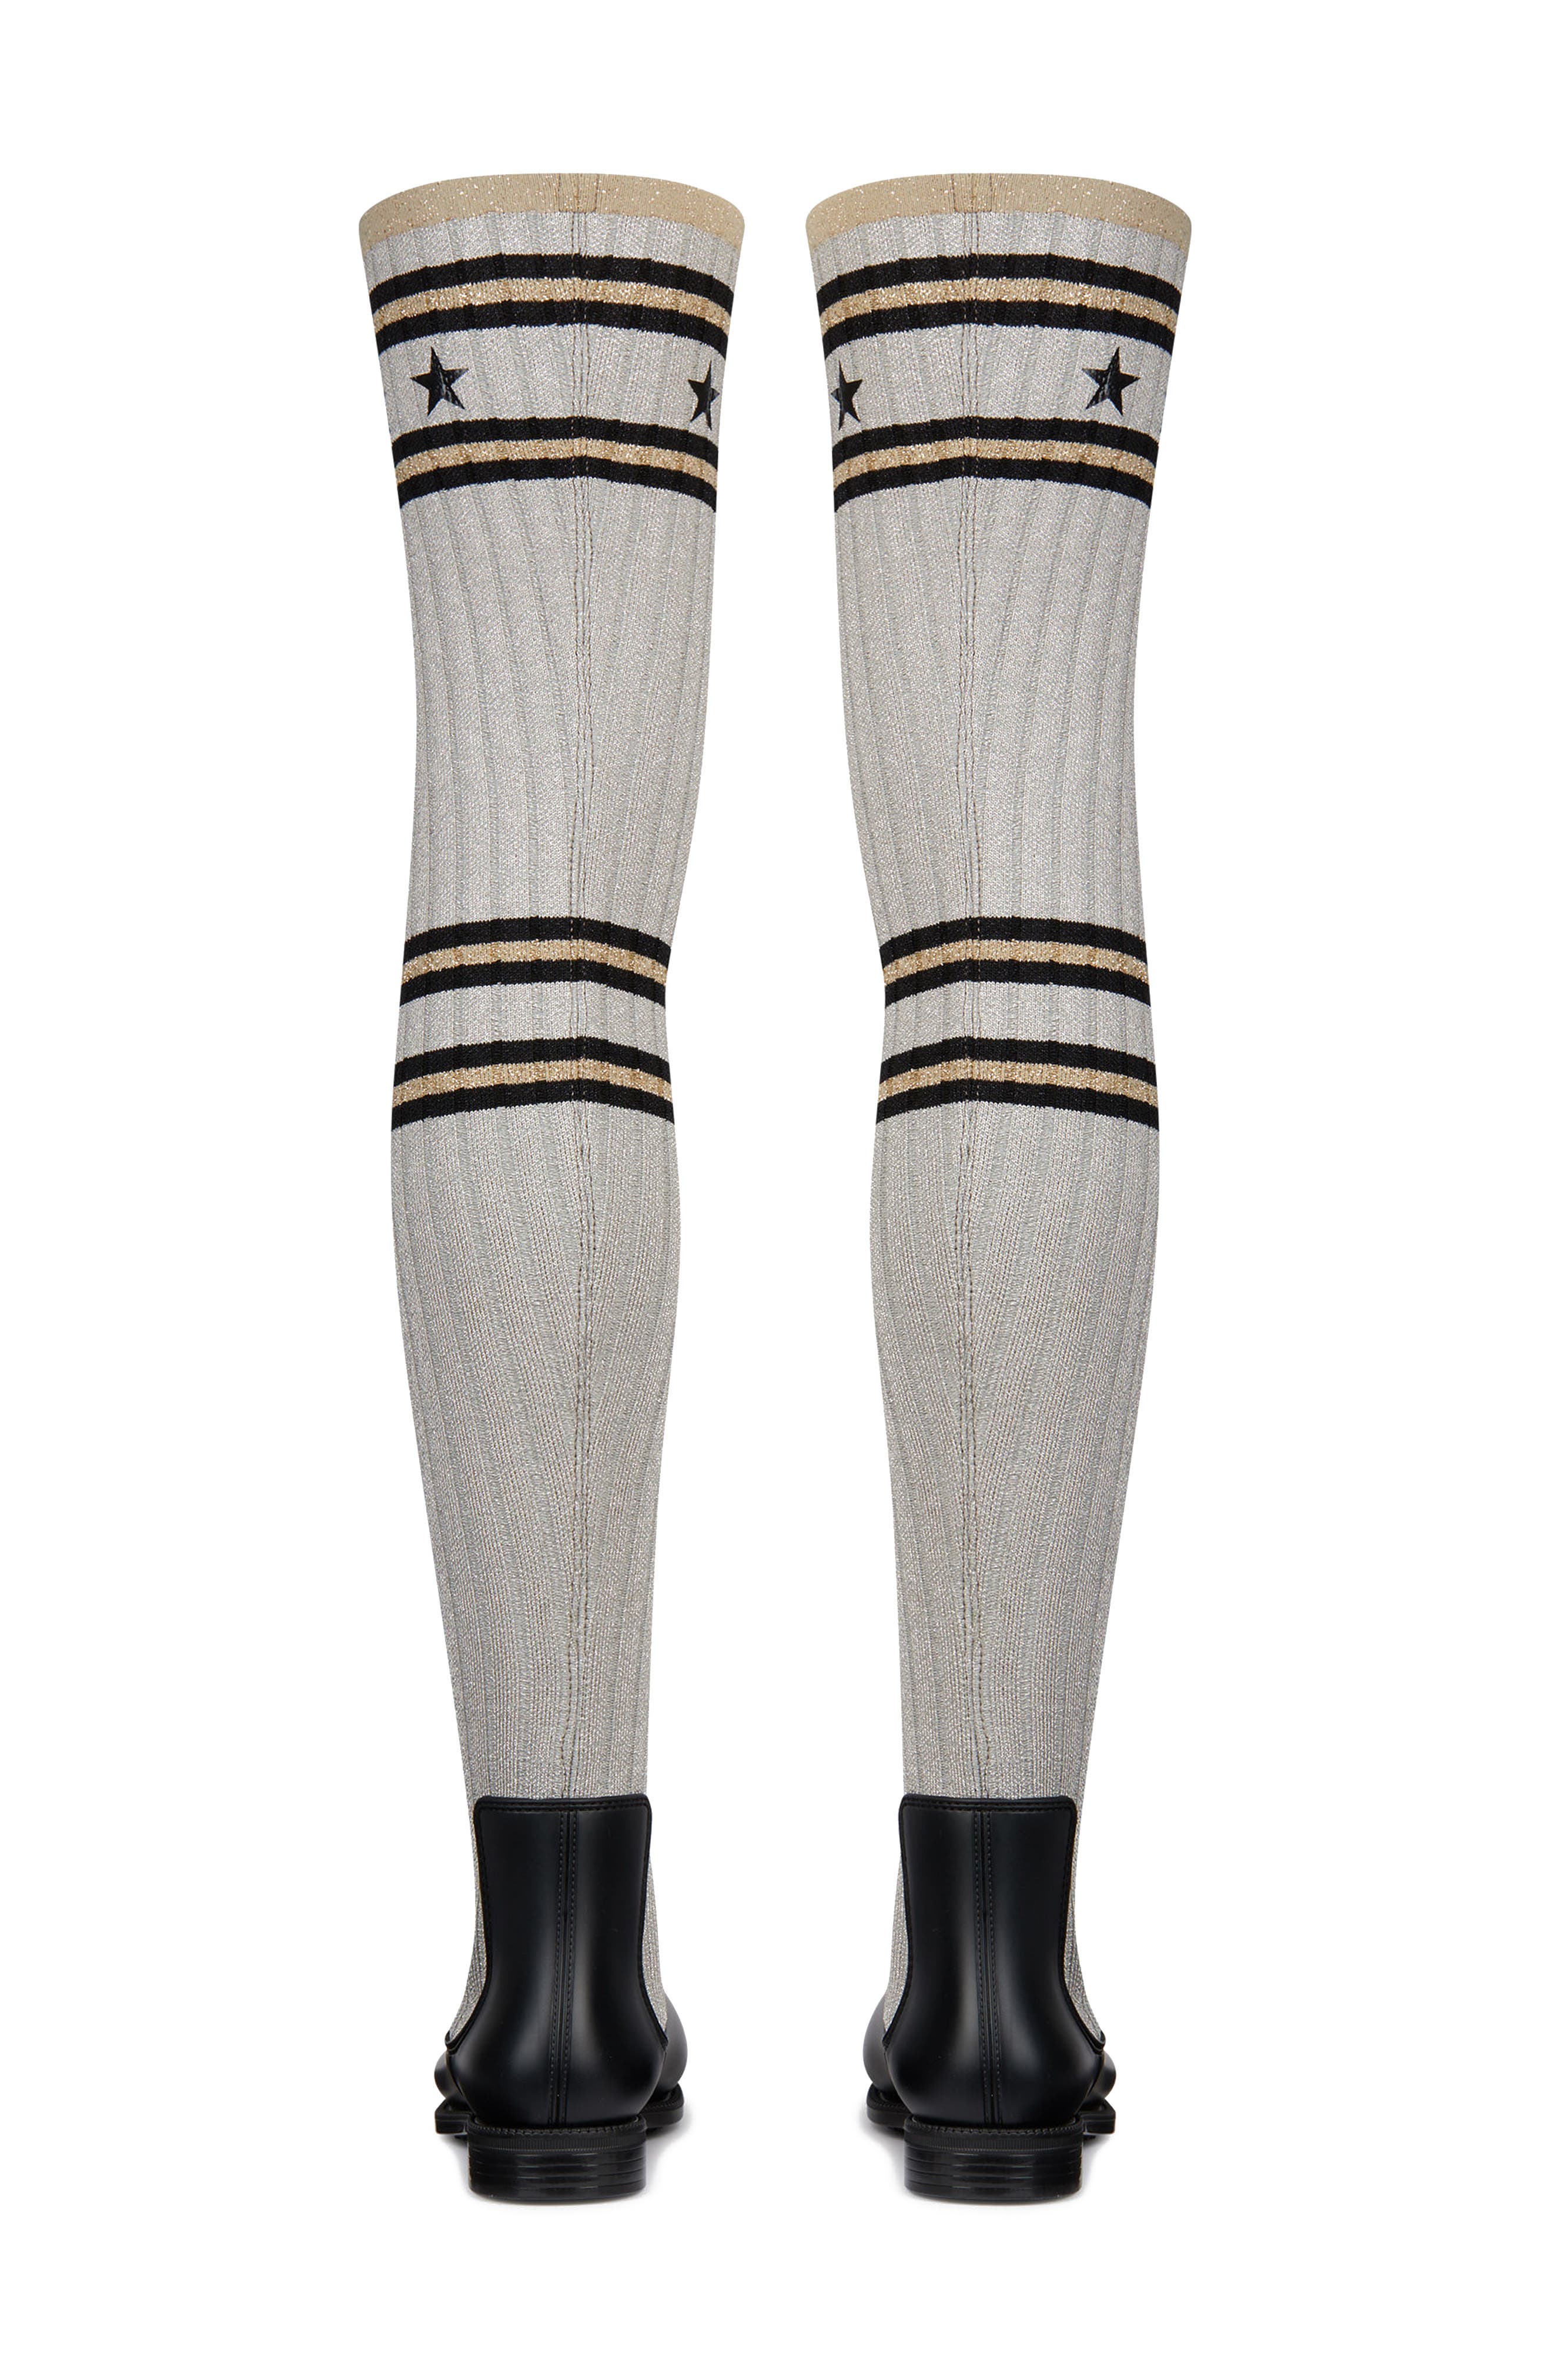 givenchy storm over the knee sock boot